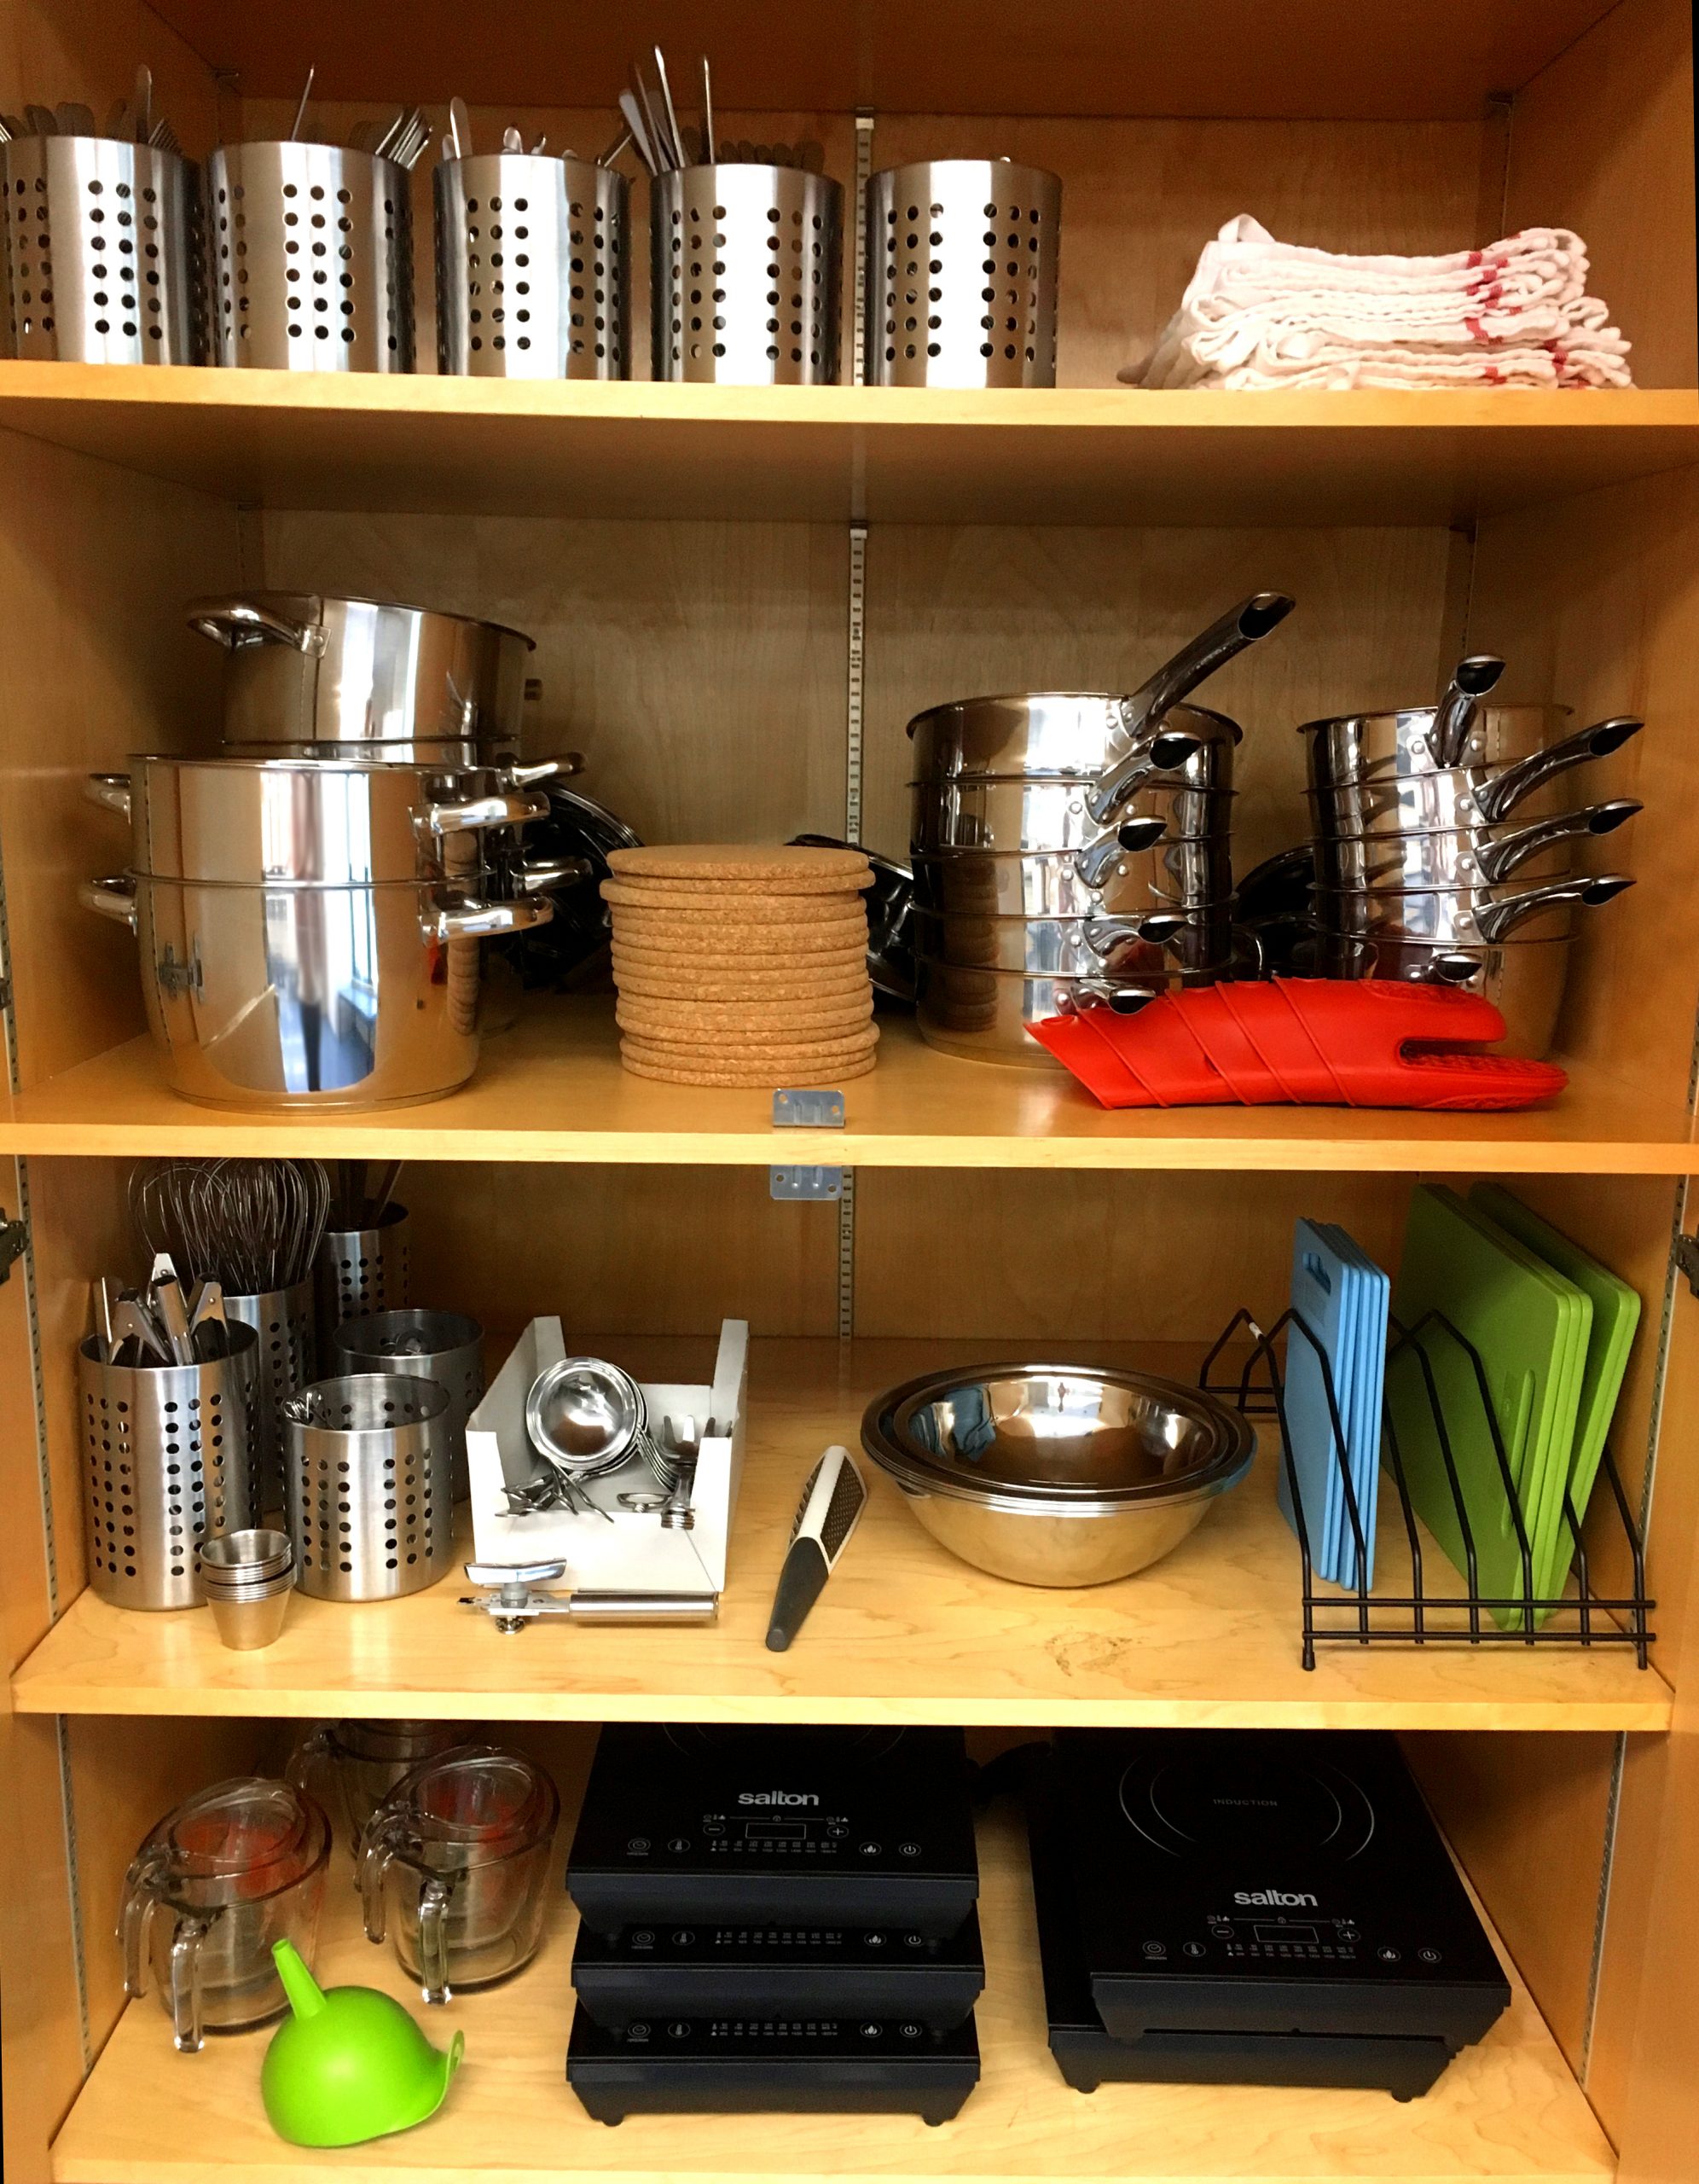 Four shelves of various cookware: pots, pans, cutlery, cutting boards, bowls, hotplates.